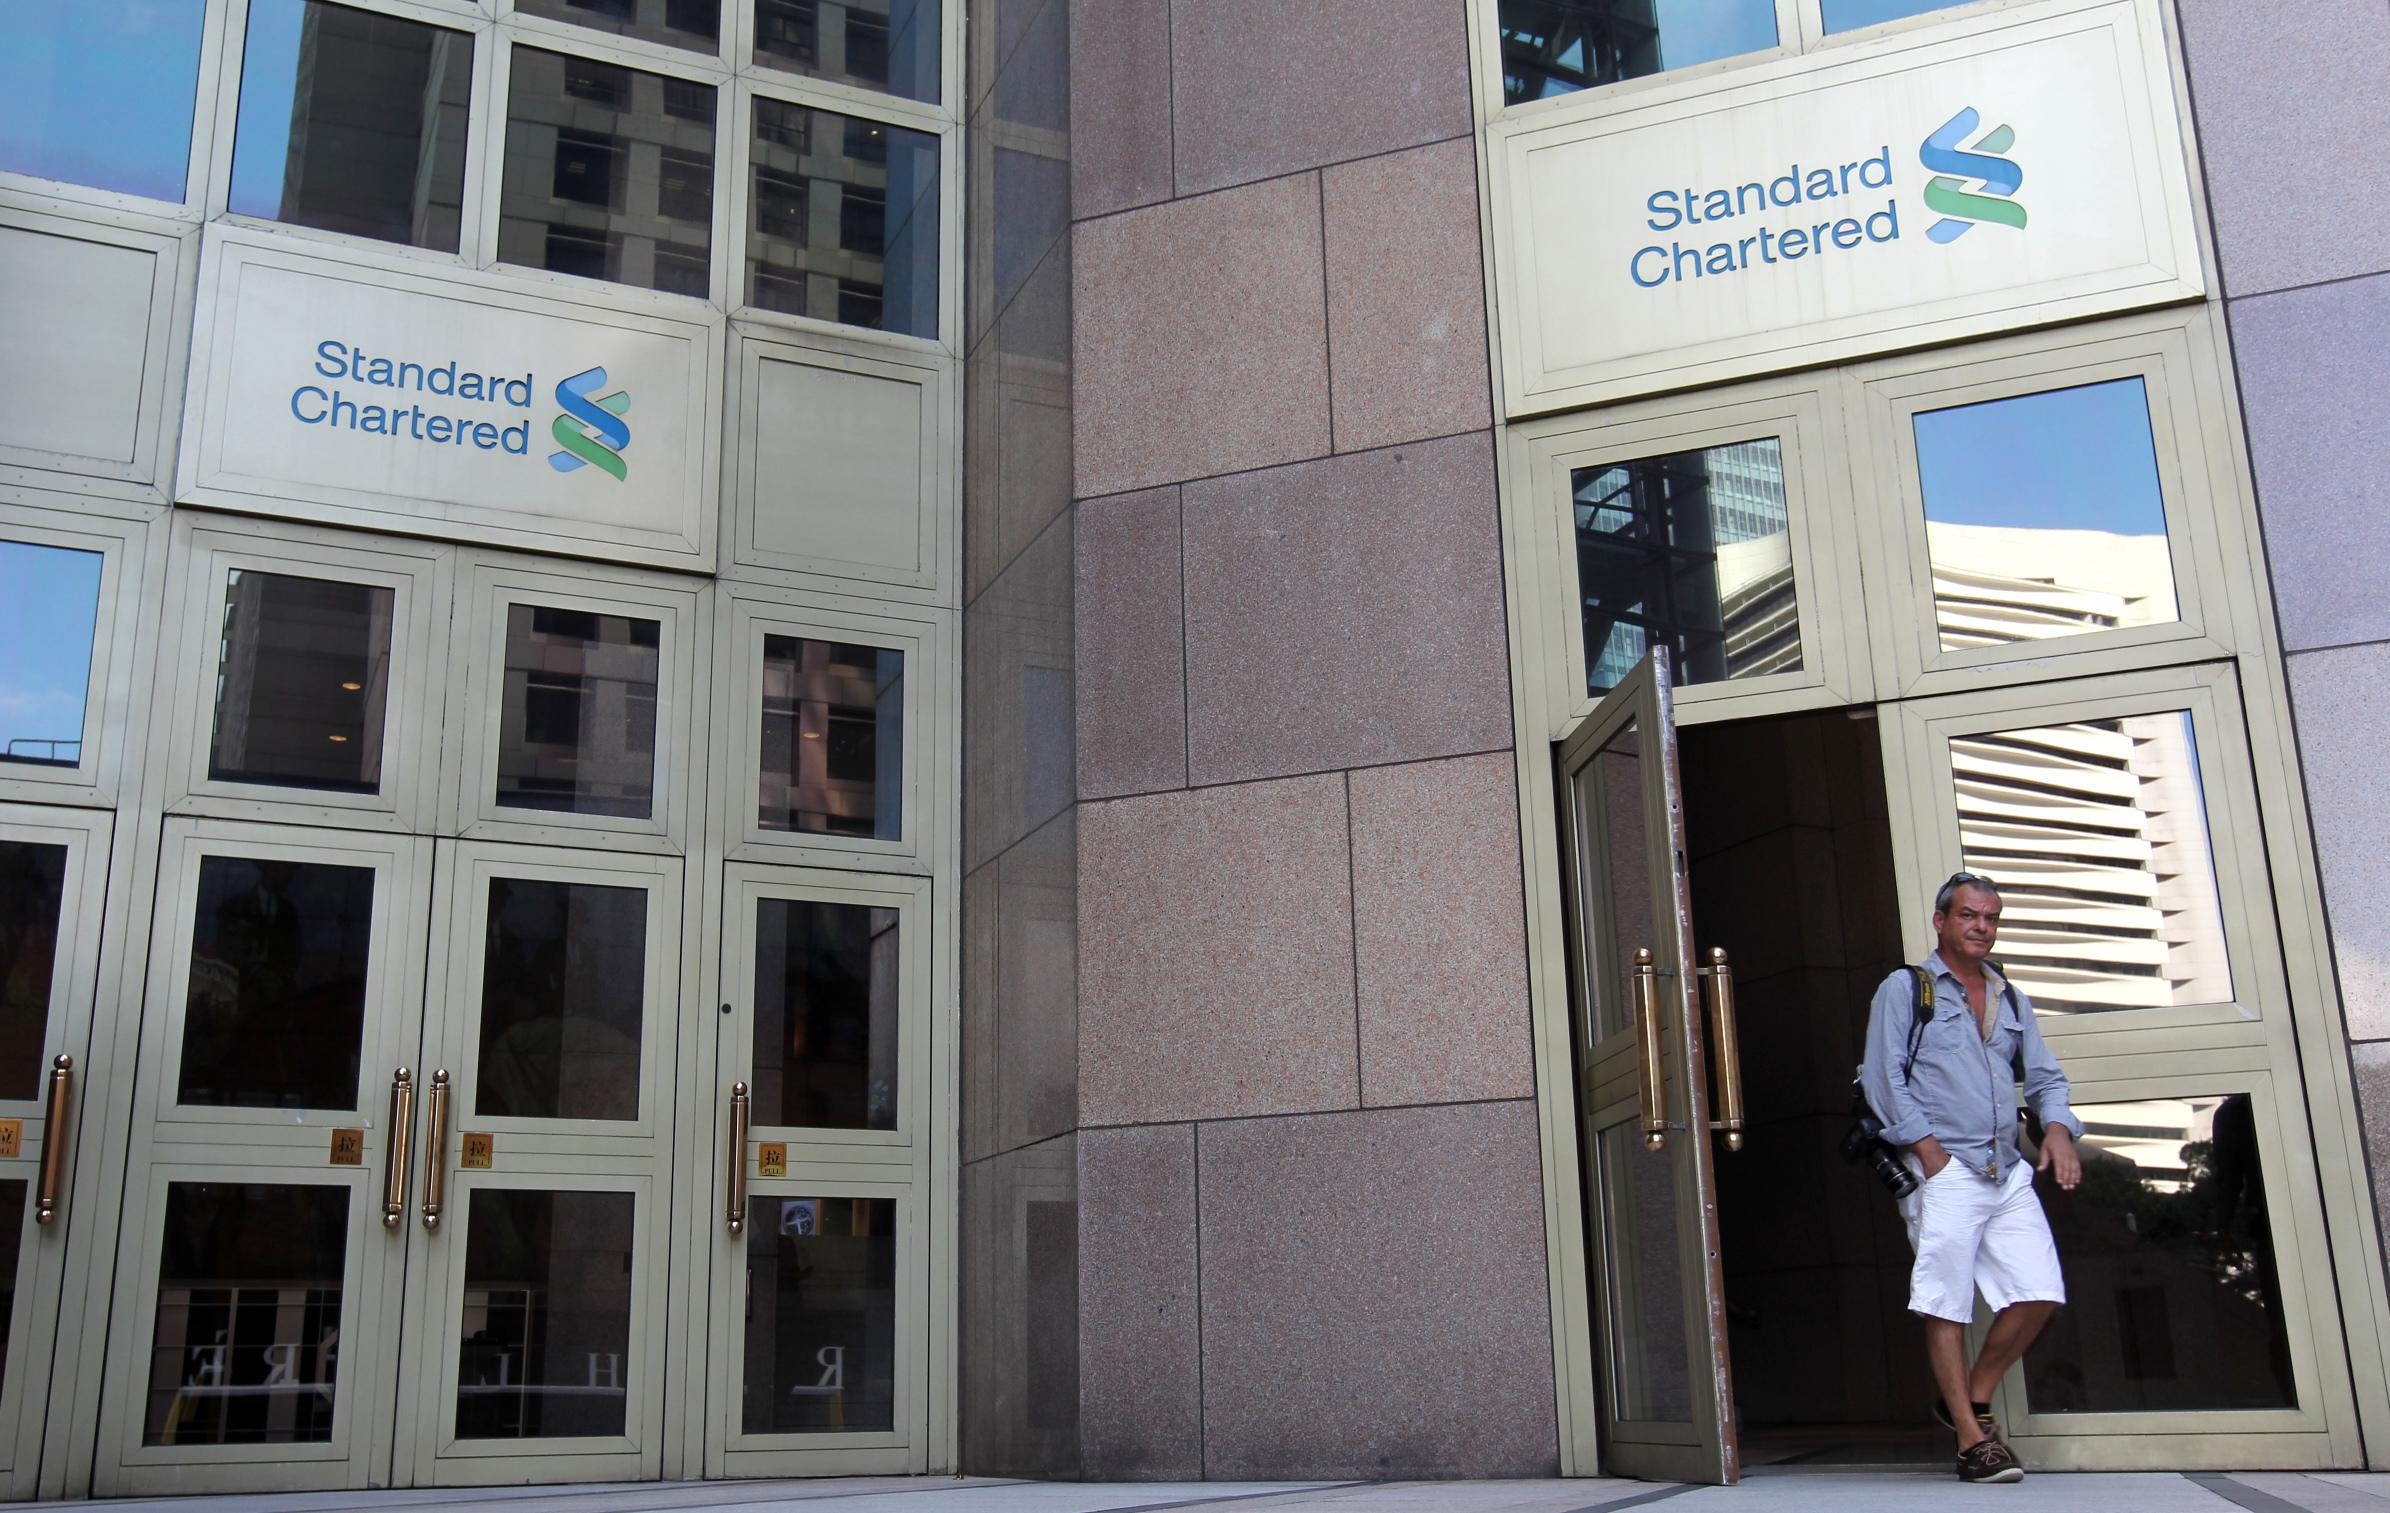 Standard Chartered appears to be divesting its consumer finance businesses in Hong Kong and South Korea. Photo: Dickson Lee